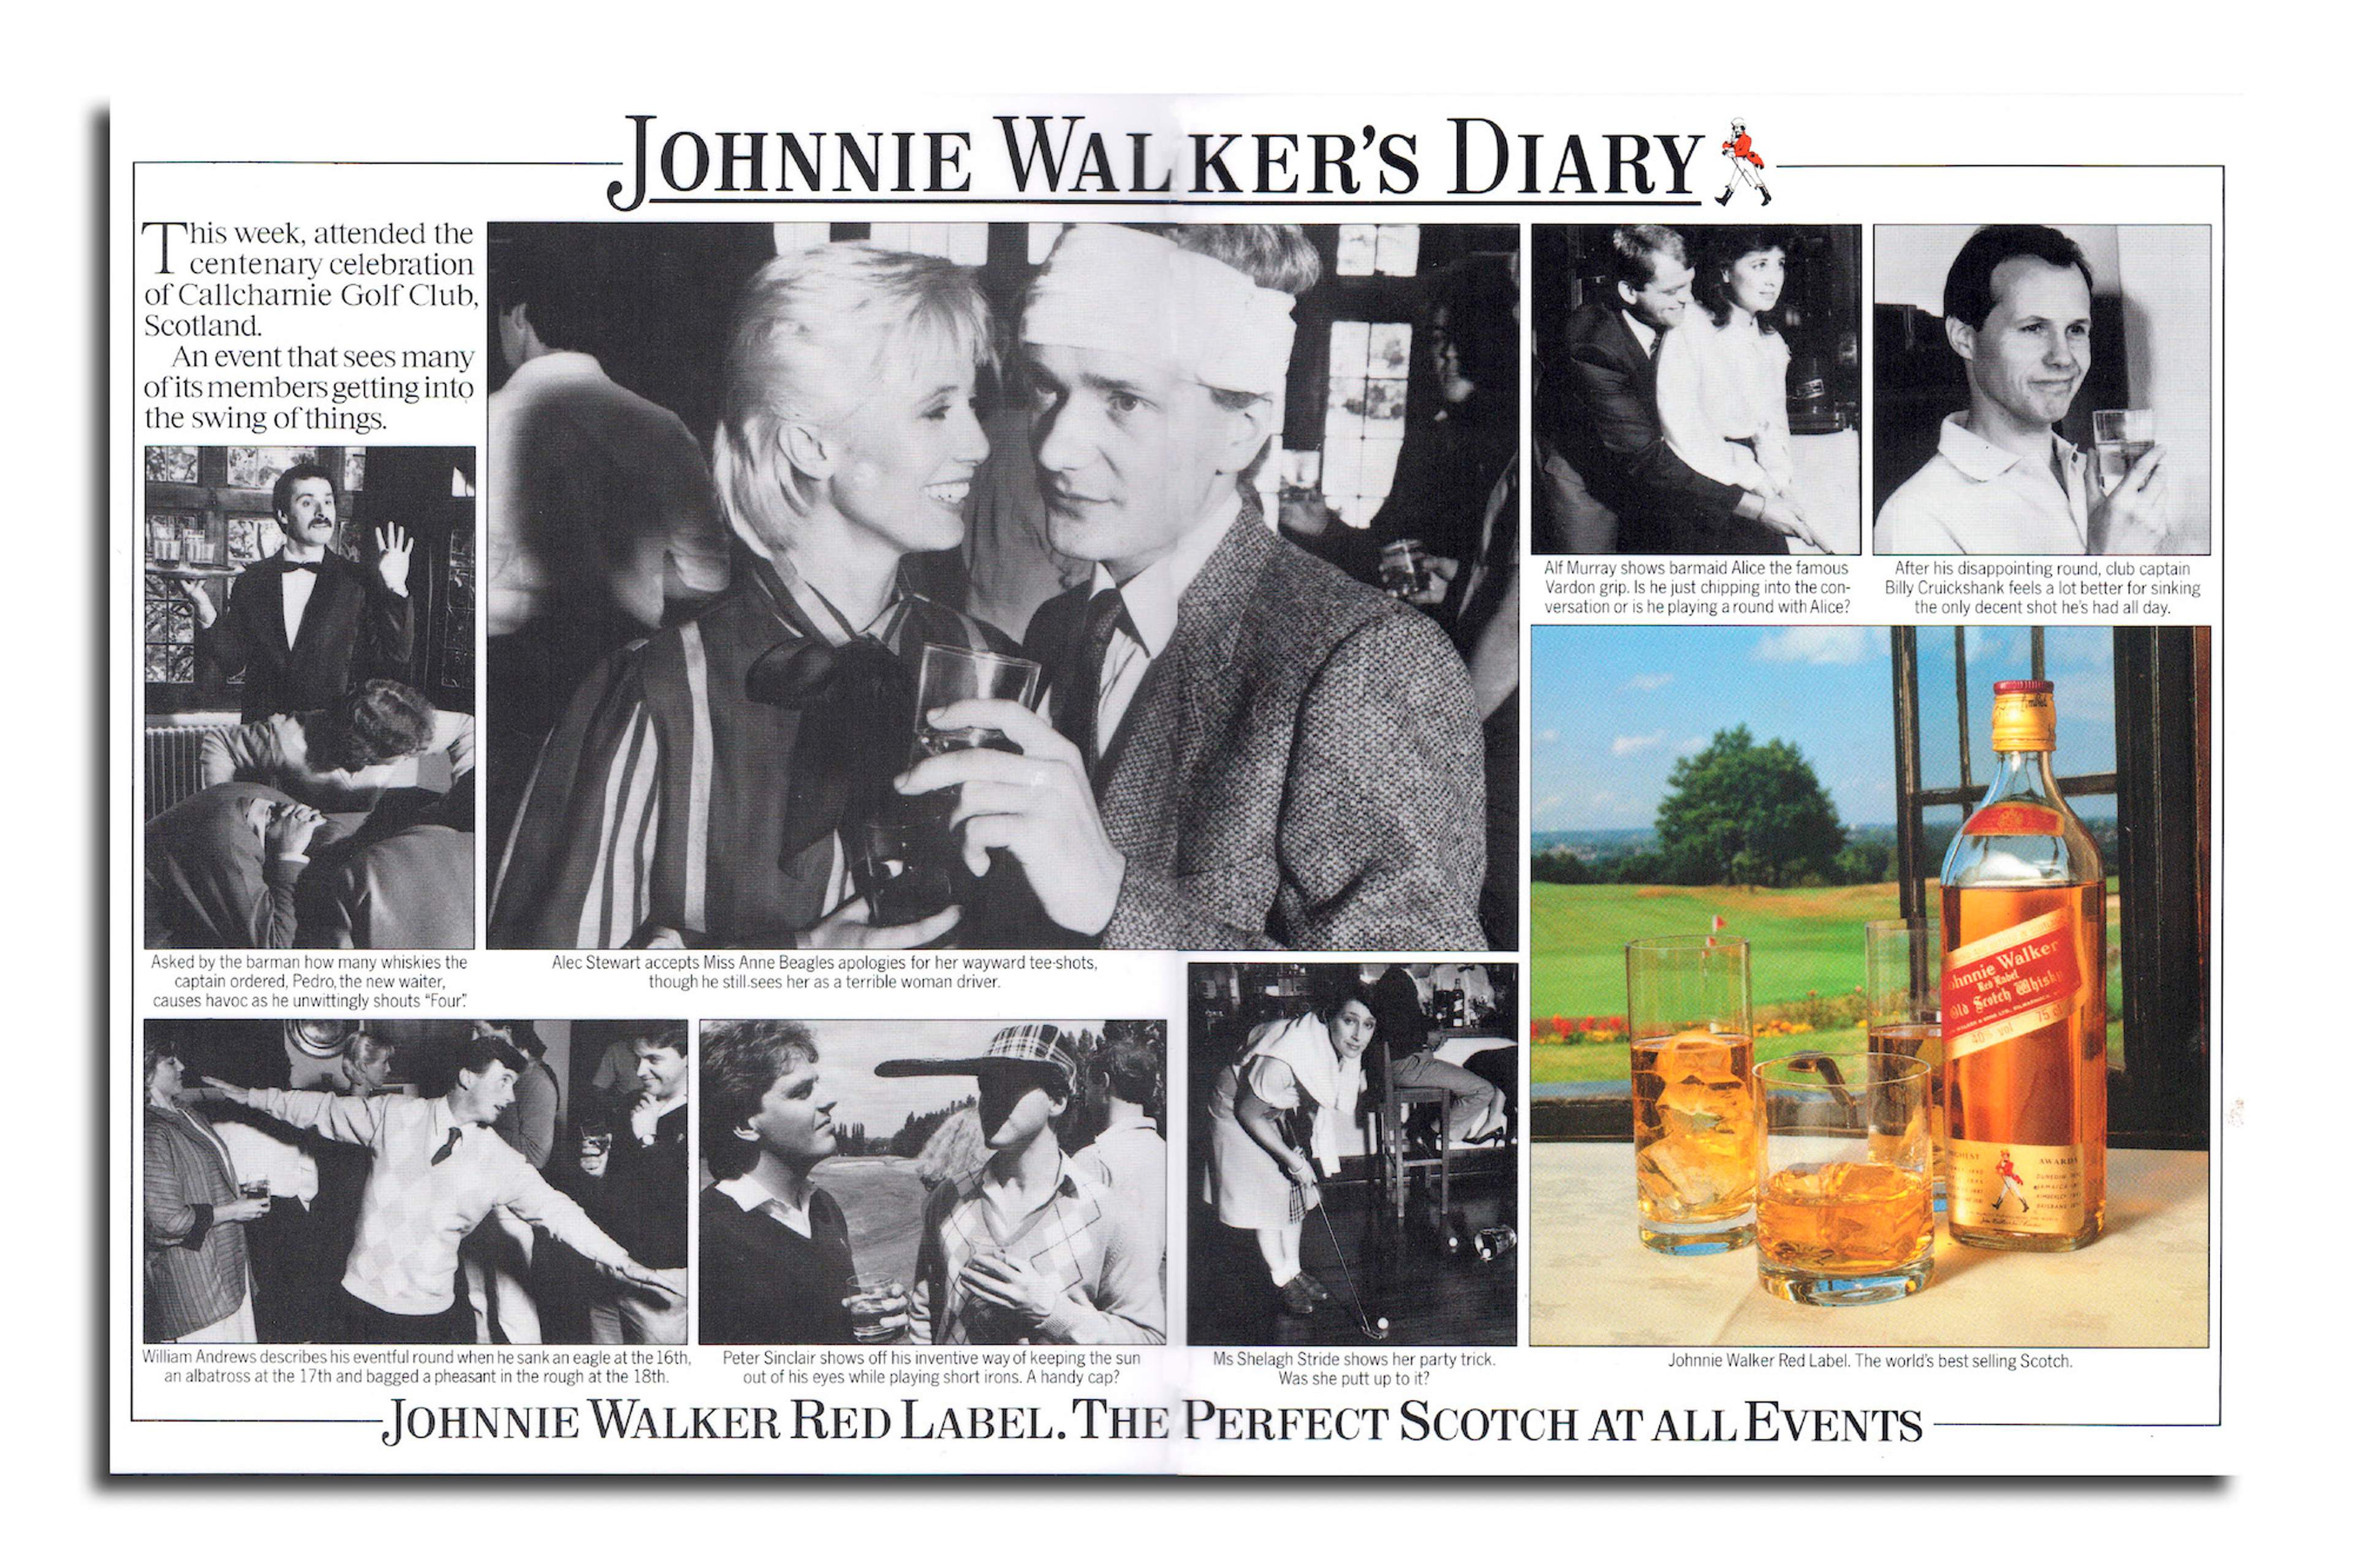 Johnnie Walker Red Label double-page spread in the Johnnie Walker's Diary campaign.